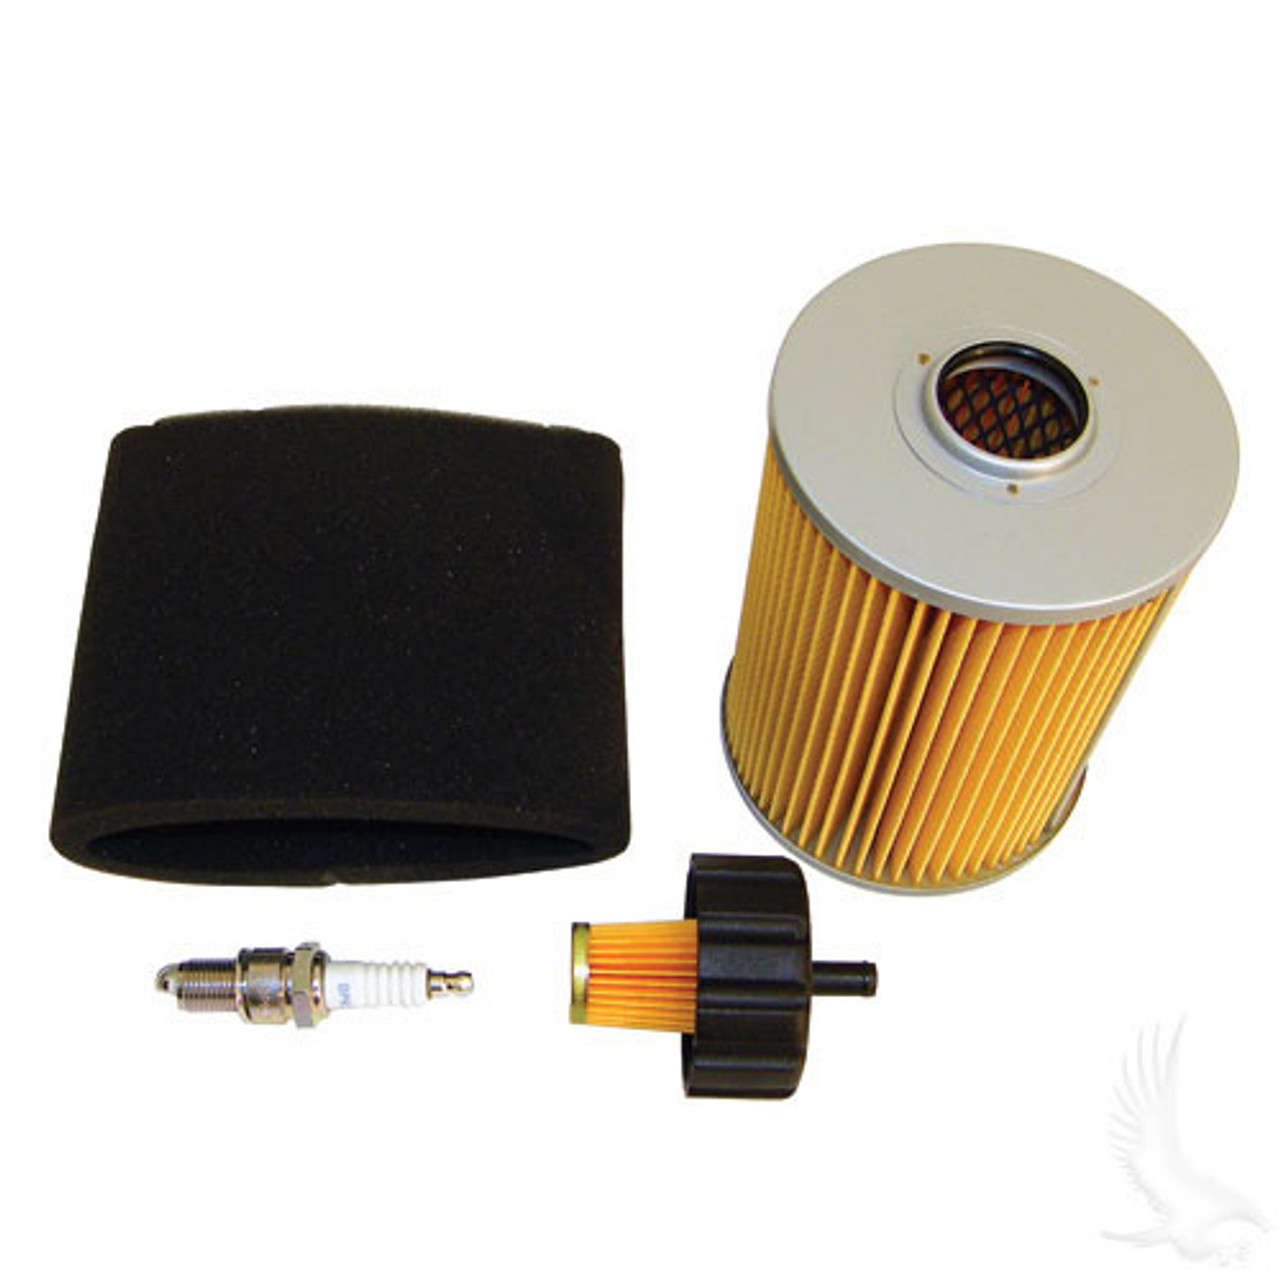 Tune Up Kit, Yamaha G2/G9/G11 4-cycle Gas oil filter | Extremekartz.com